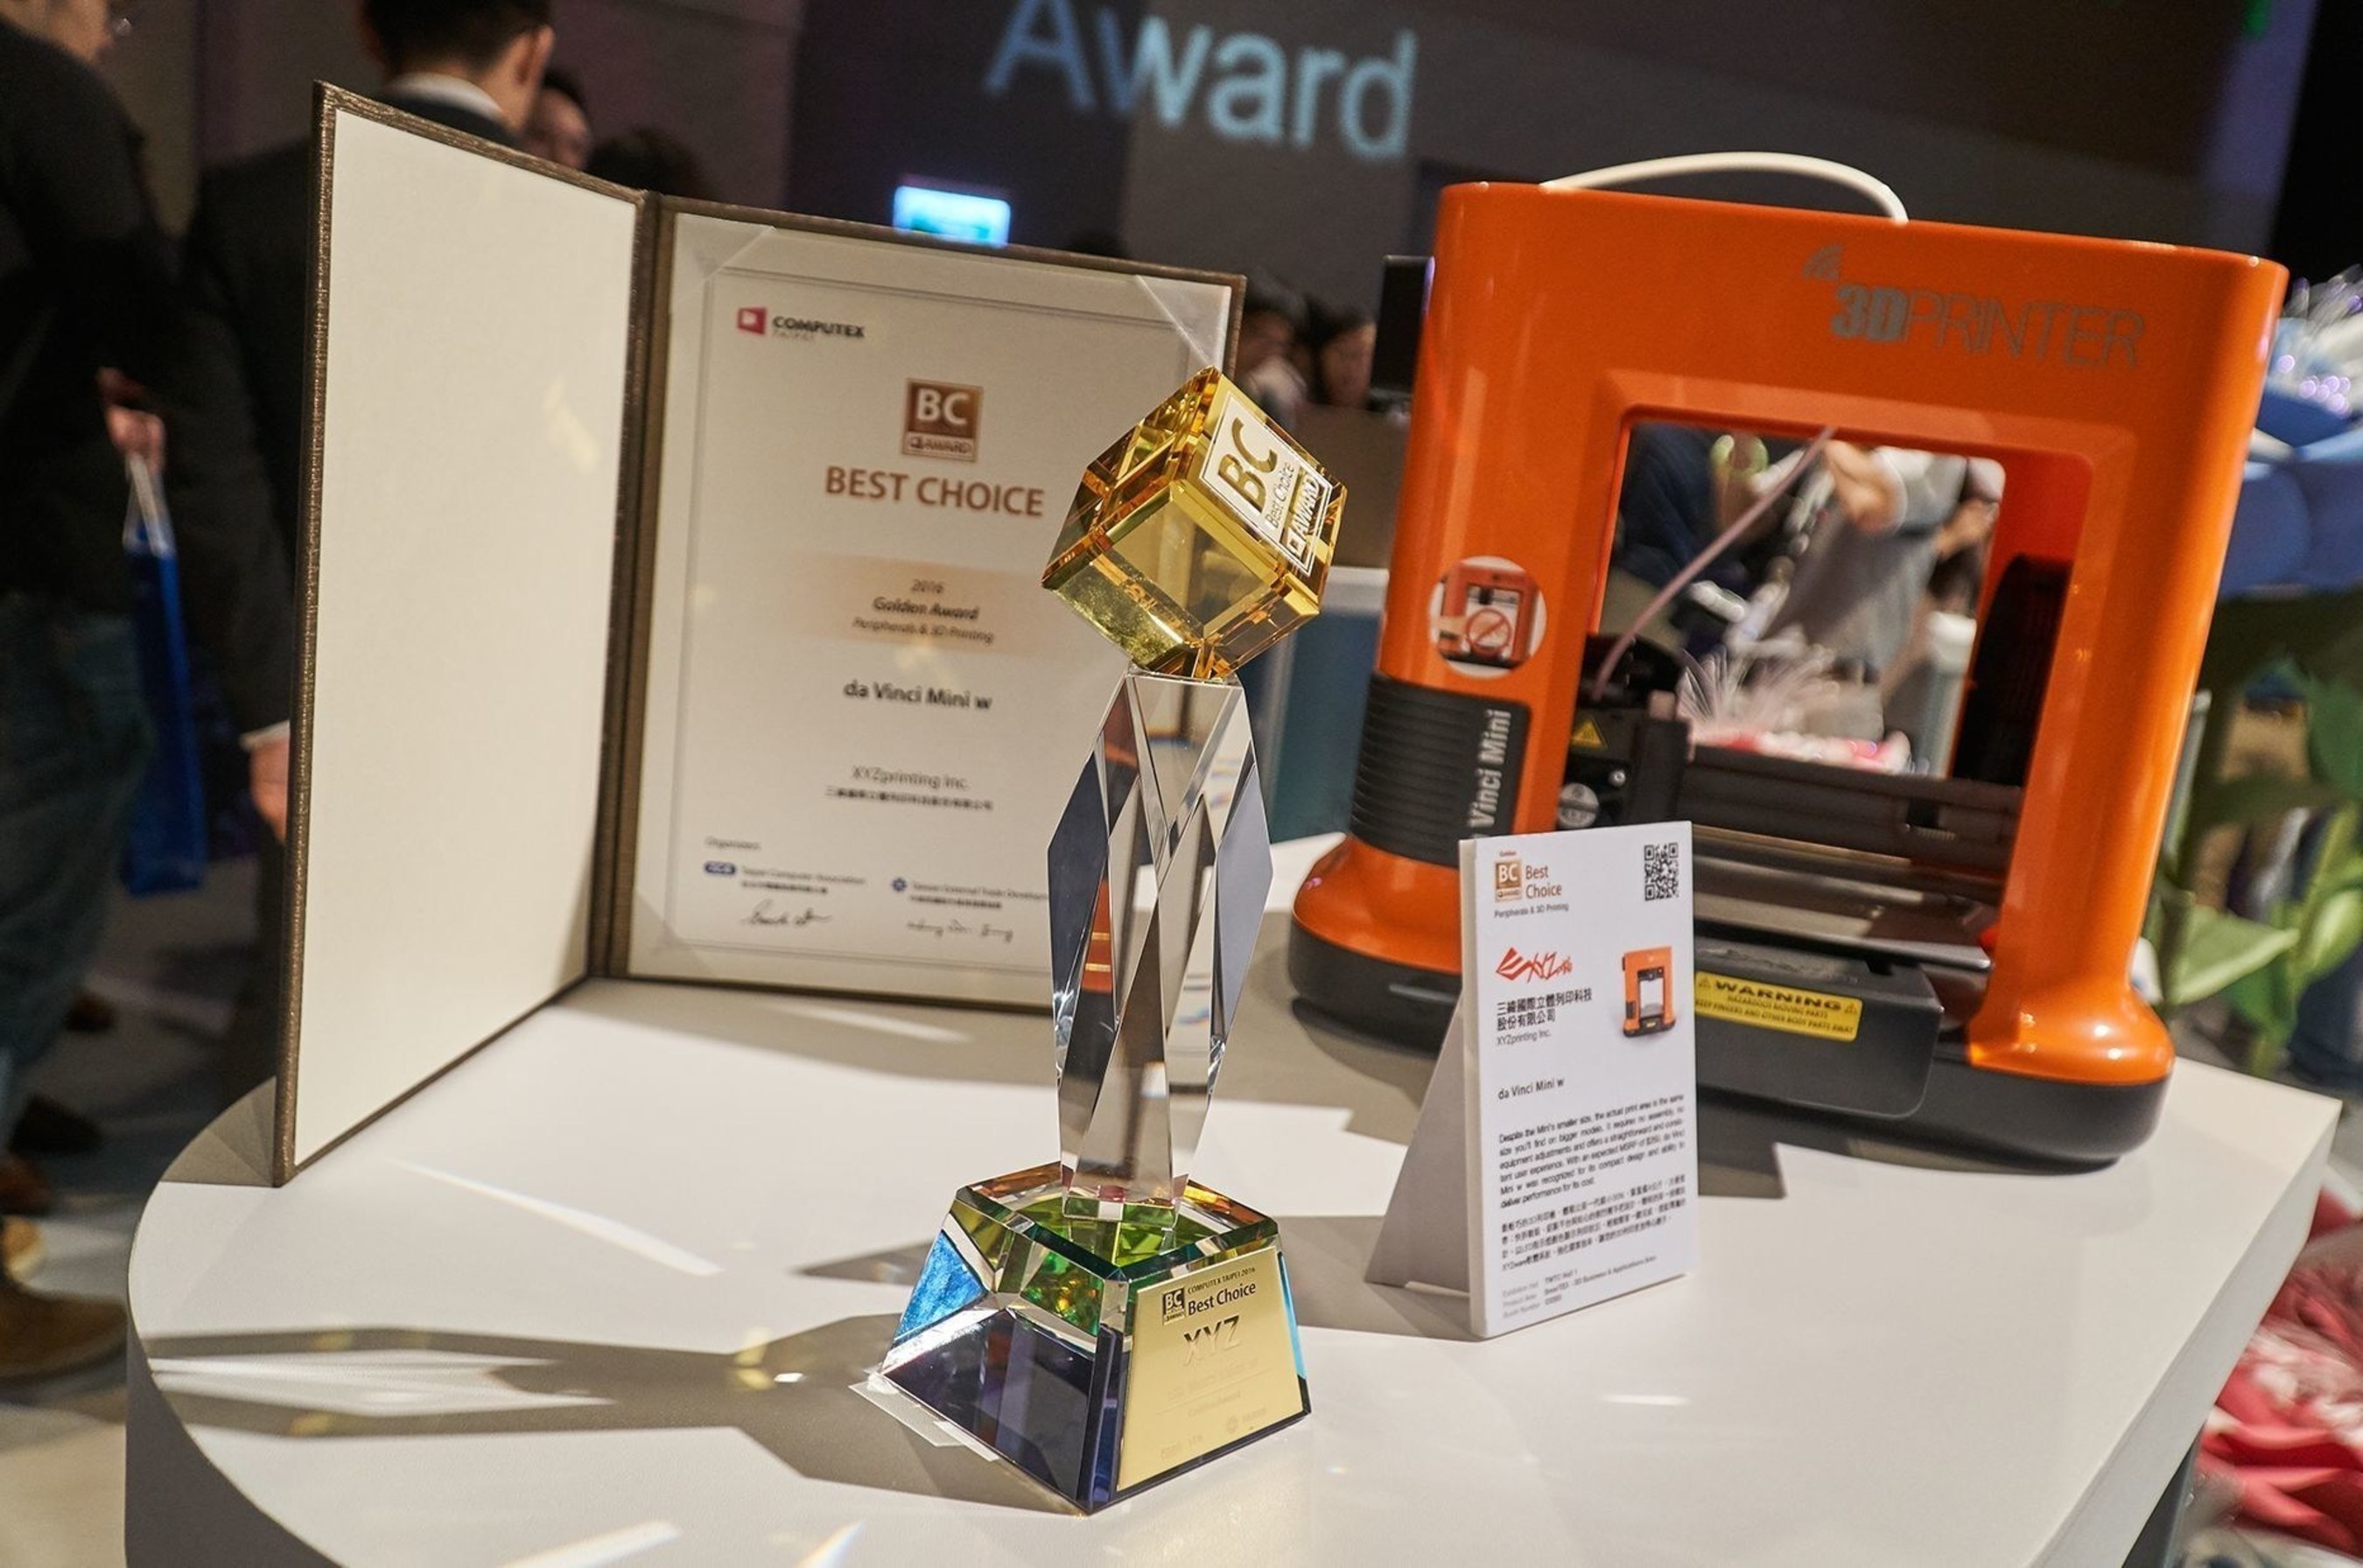 XYZprinting, the world's leading 3D printing company,  was awarded the Best Choice Golden Award for its sub $300 3D printer, the da Vinci Mini, at Computex Taipei 2016